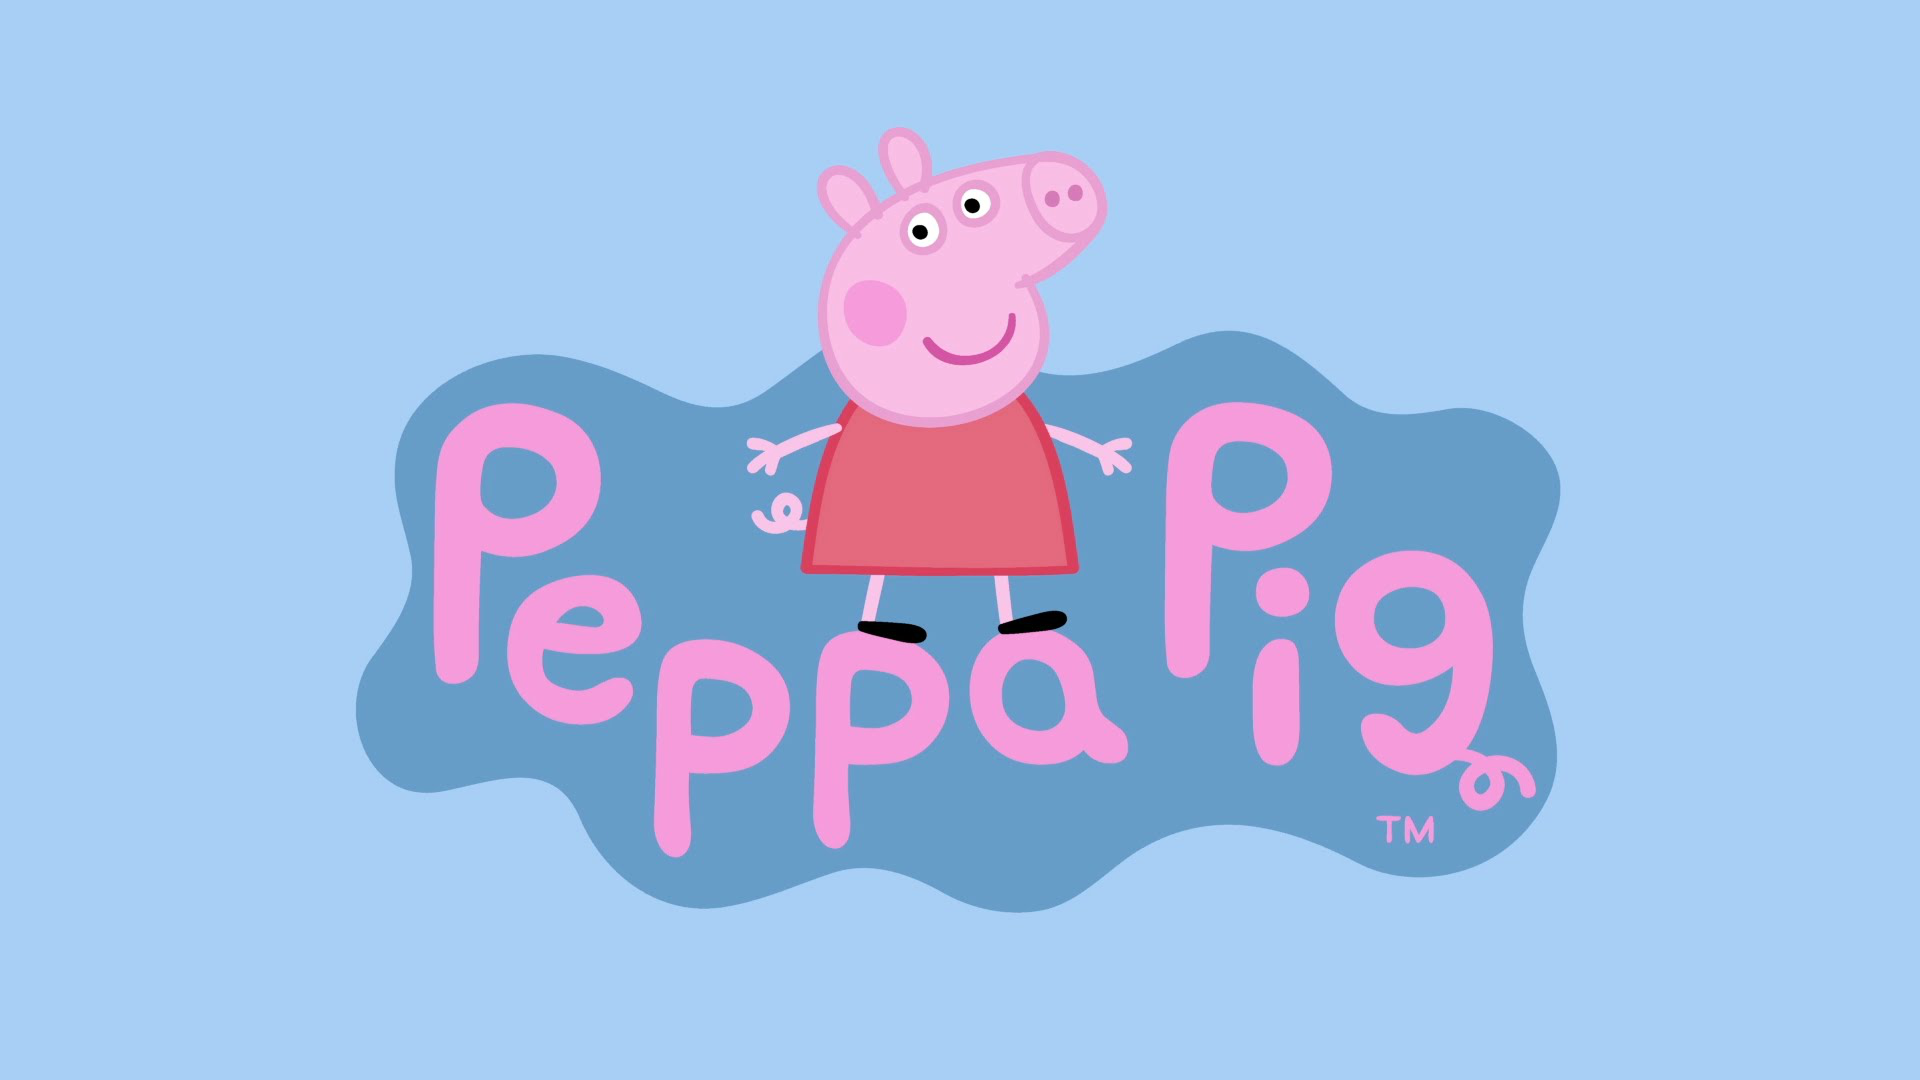 Peppa Pig: "Frogs and Worms and Butterflies" (US dub) - Peppa Pig (partially found American dub of Channel 5 animated series; 2005-2007)